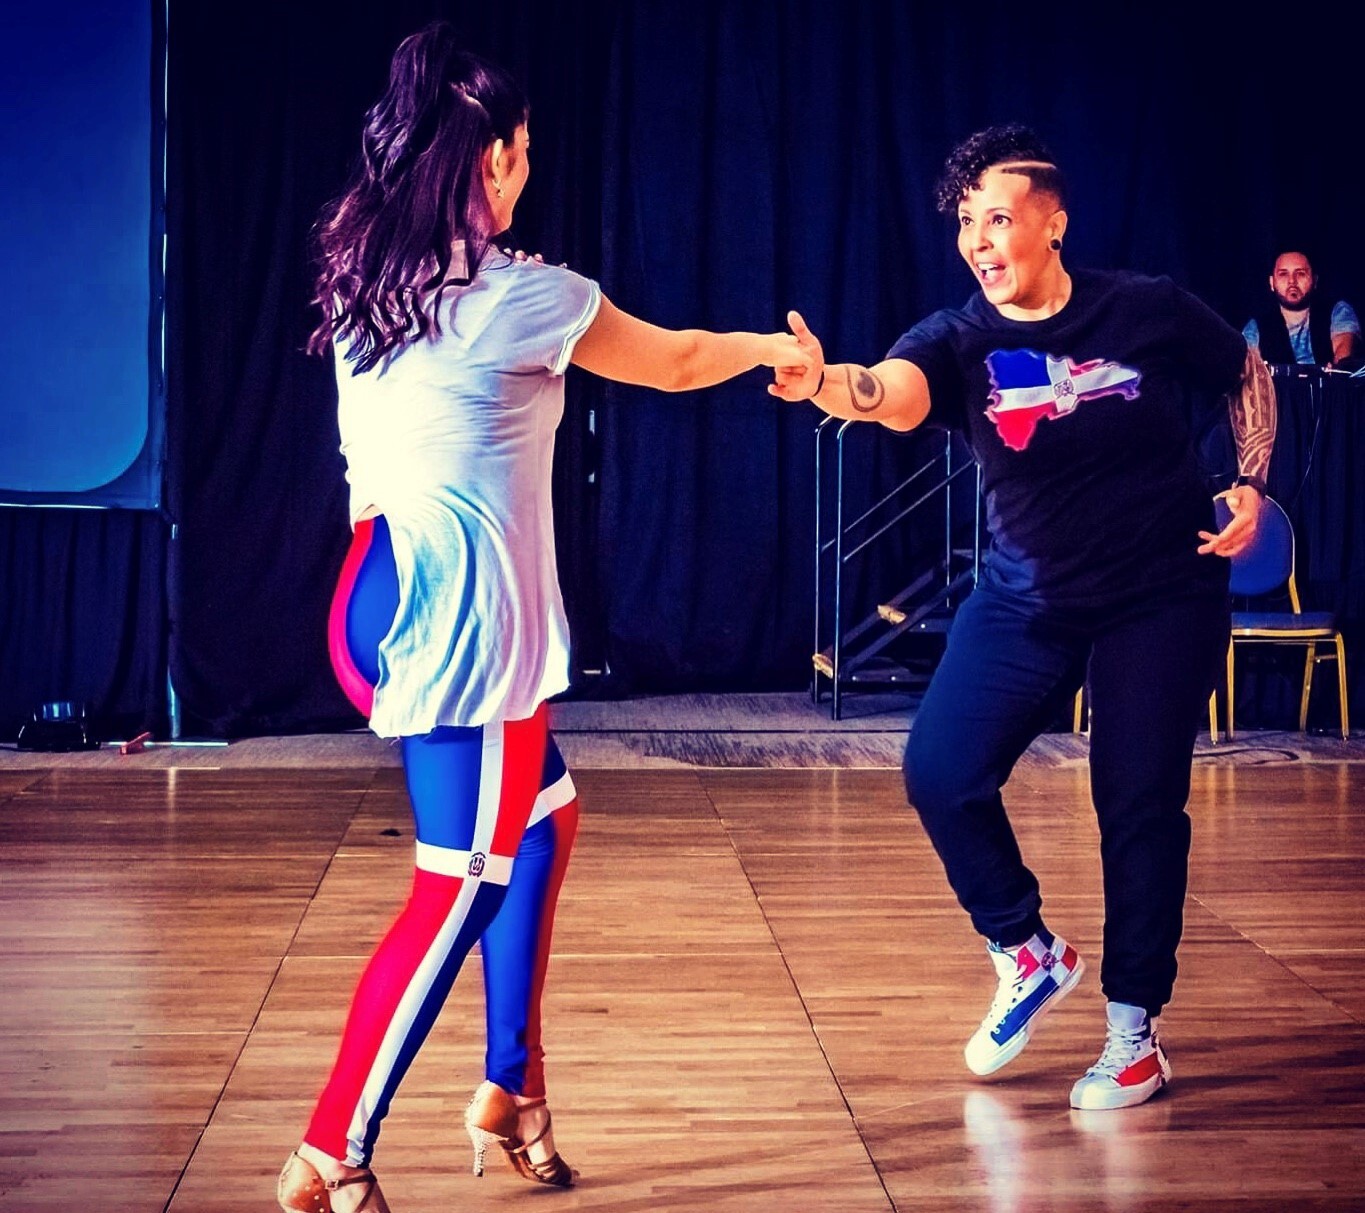 A woman in multi-colored leggings faces away from the camera, while dancing and holding the hand of a woman facing the camera in a black top and black jeans.